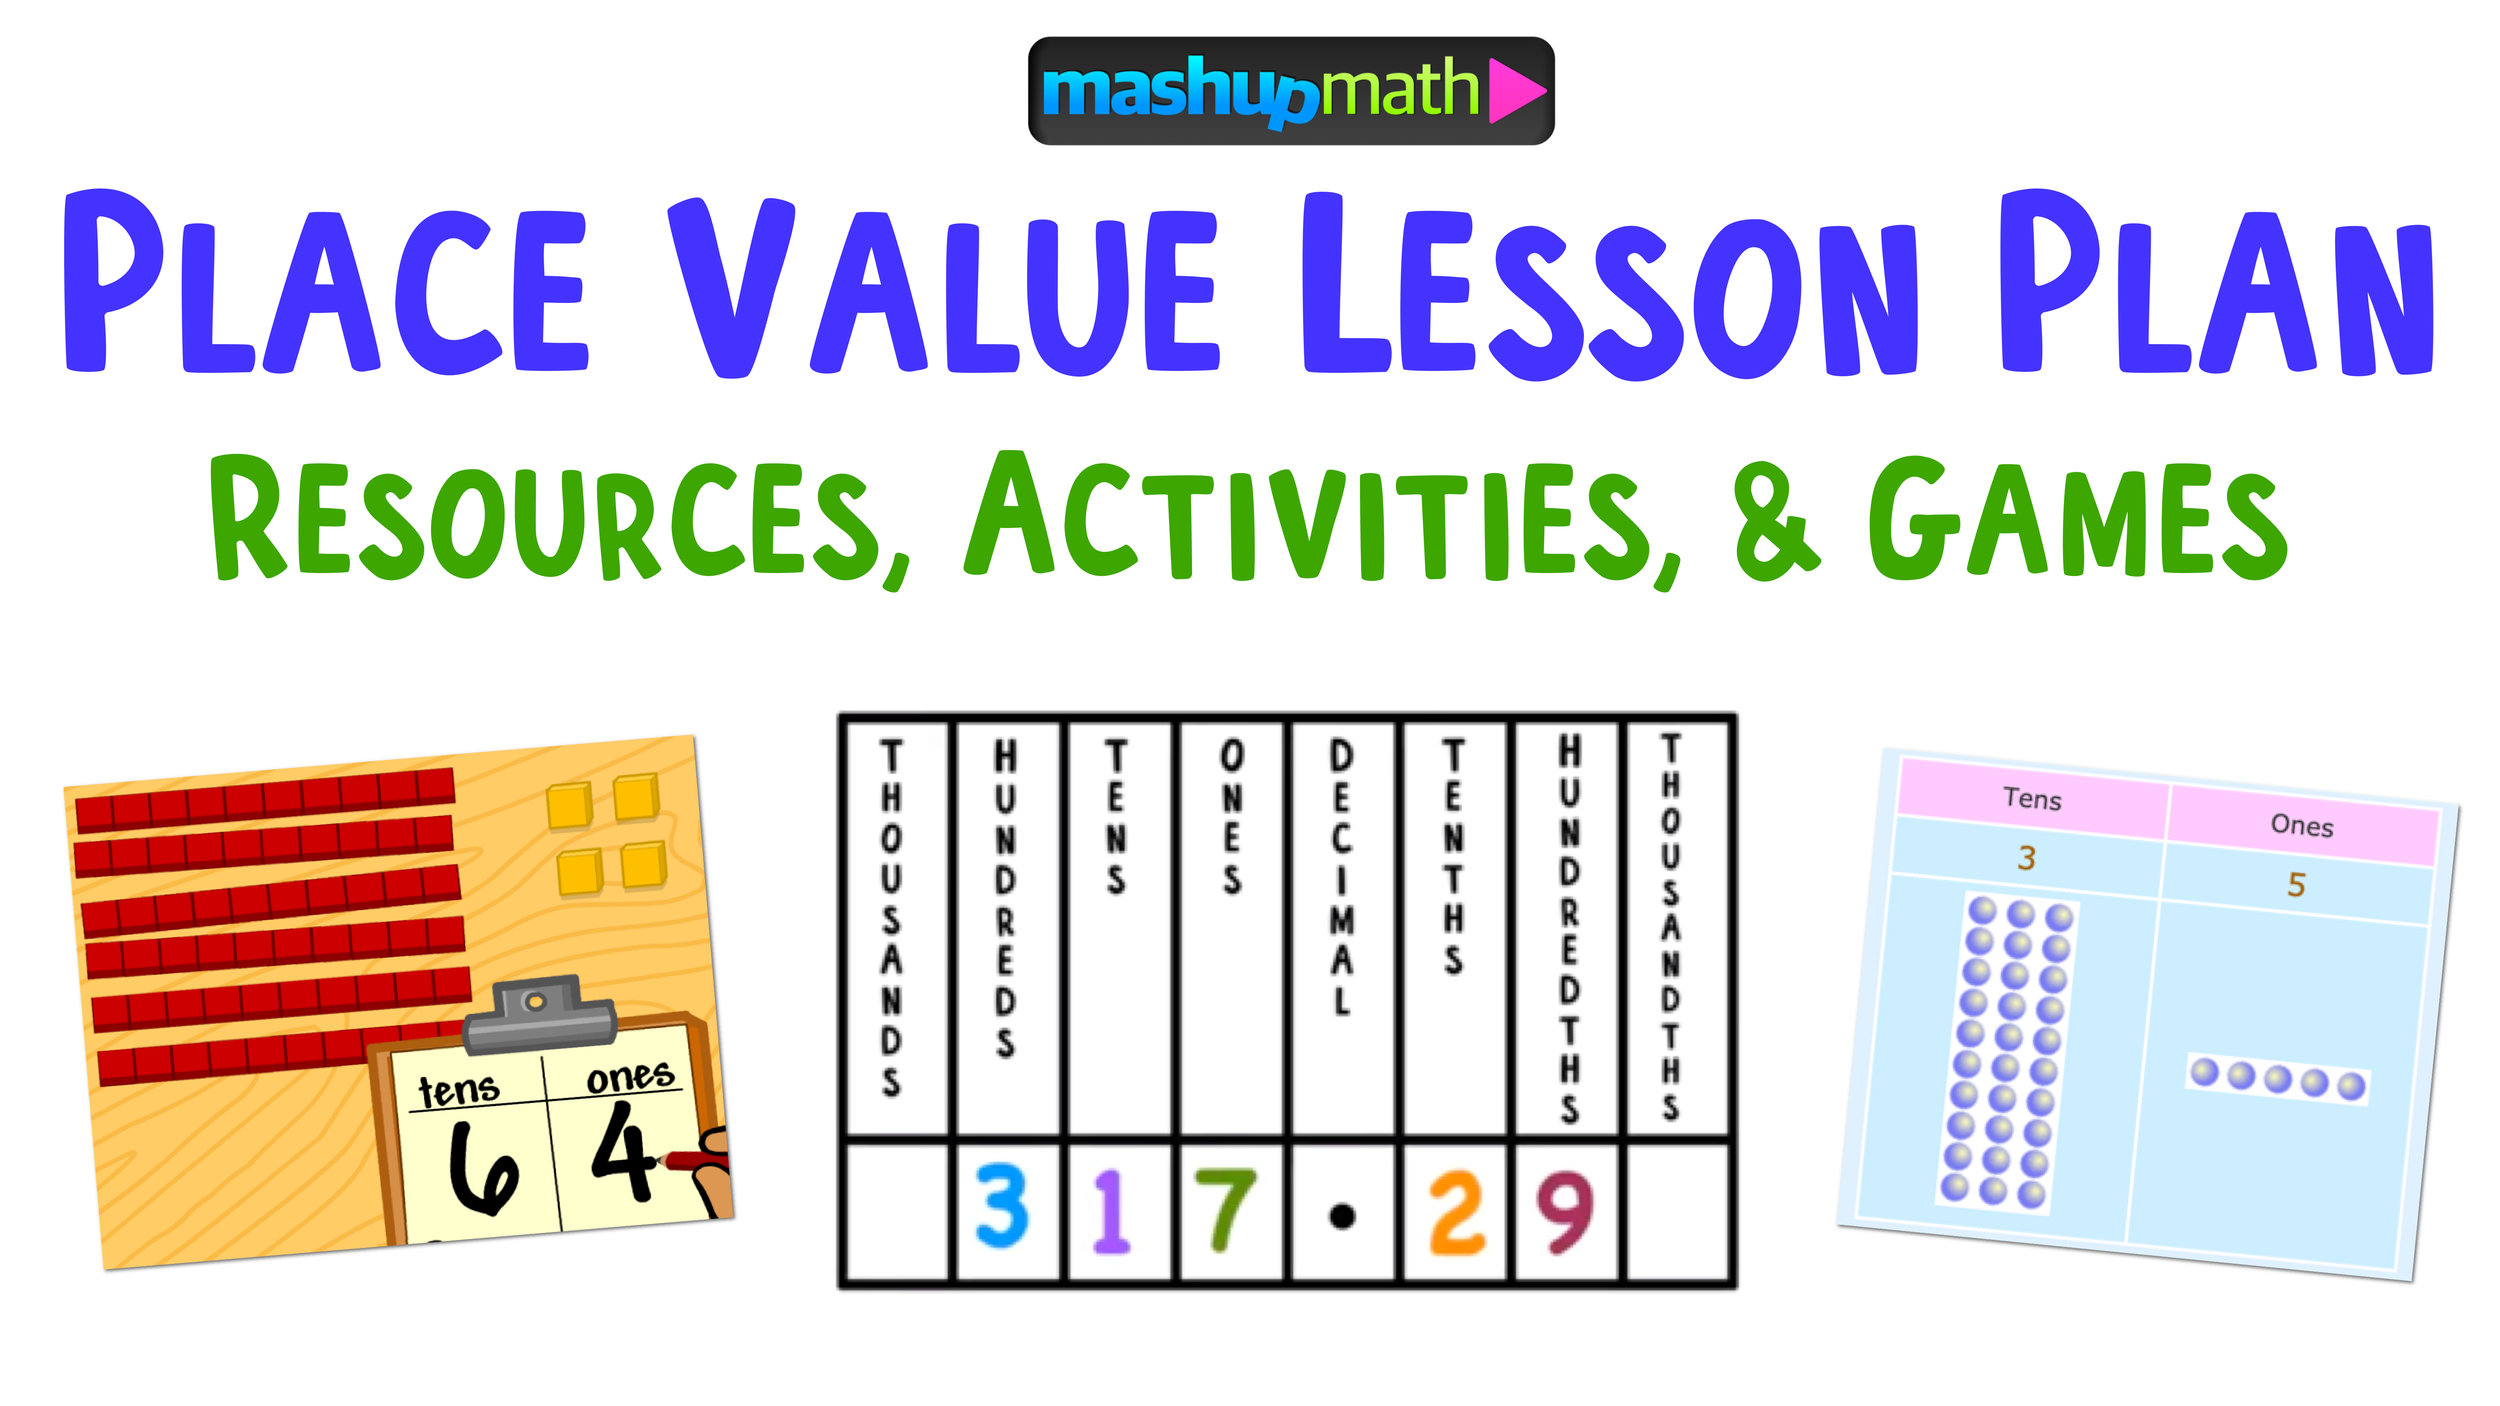 my homework lesson 1 place value 4th grade